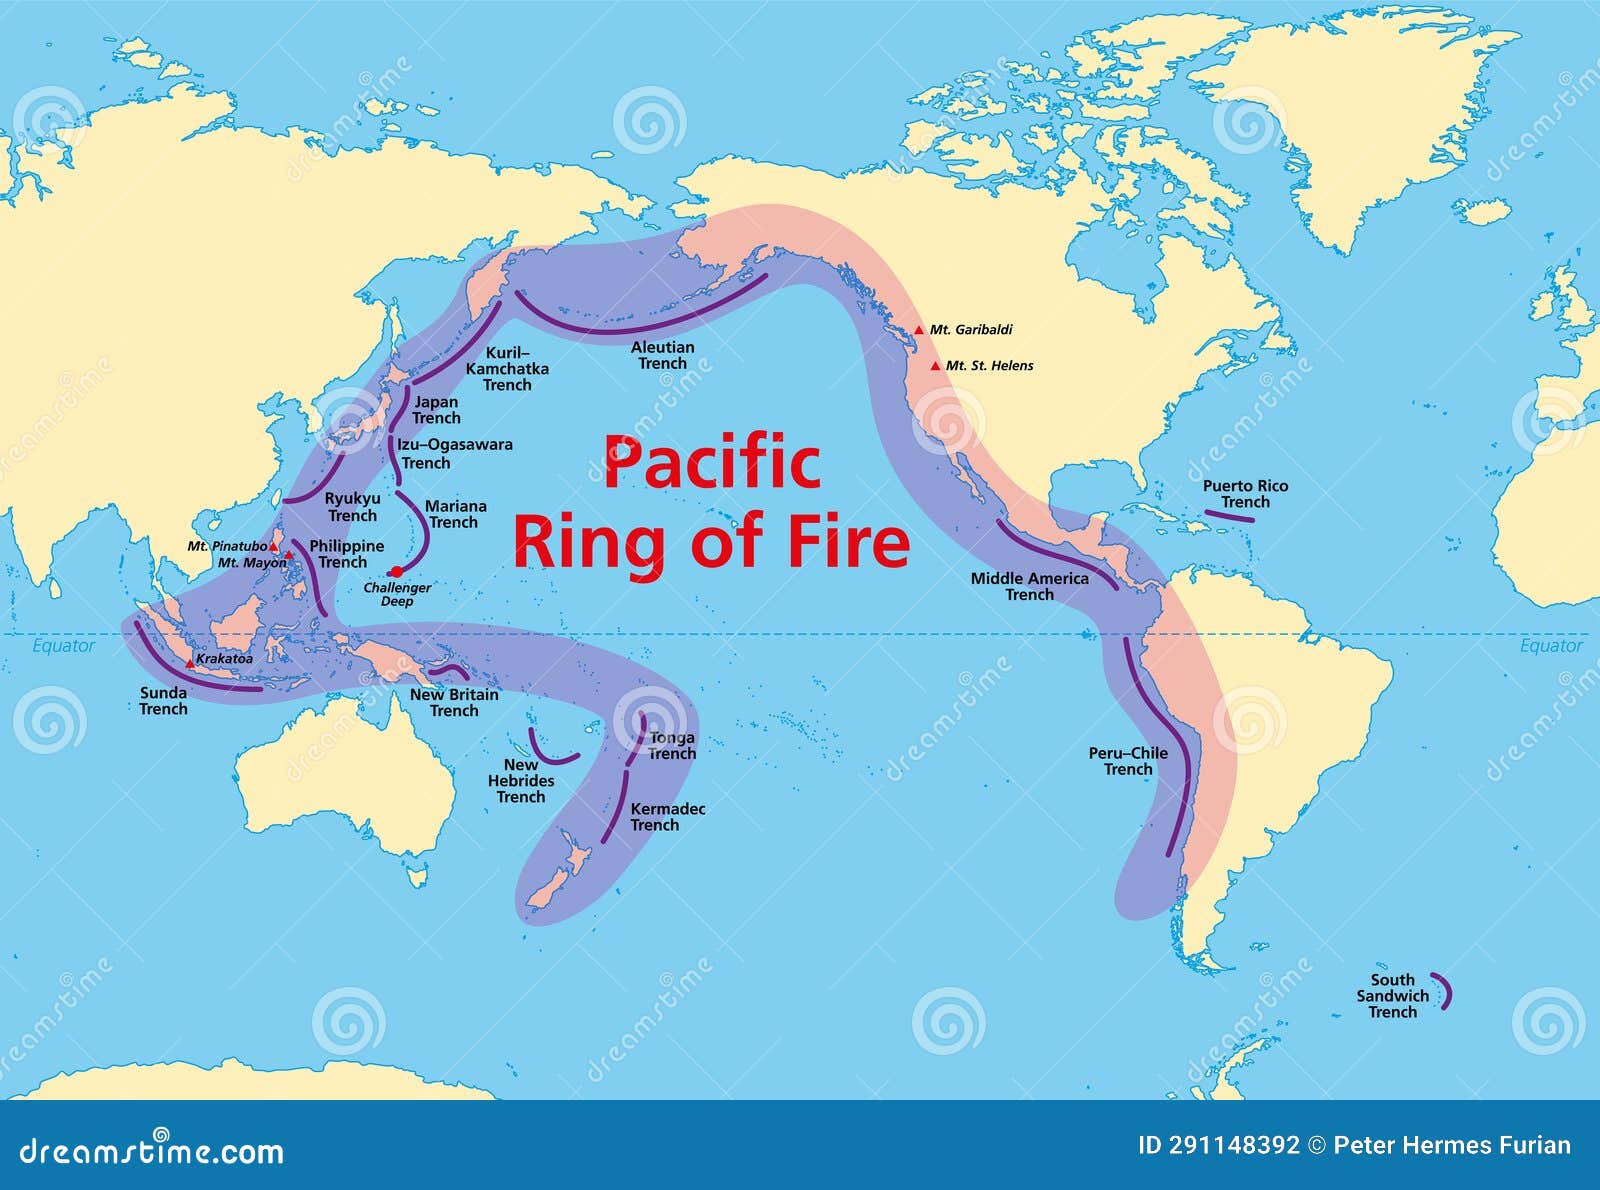 Ring of Fire - Animated Map of World Earthquakes (Jan 1 - Mar 12, 2011 GMT)  on Vimeo